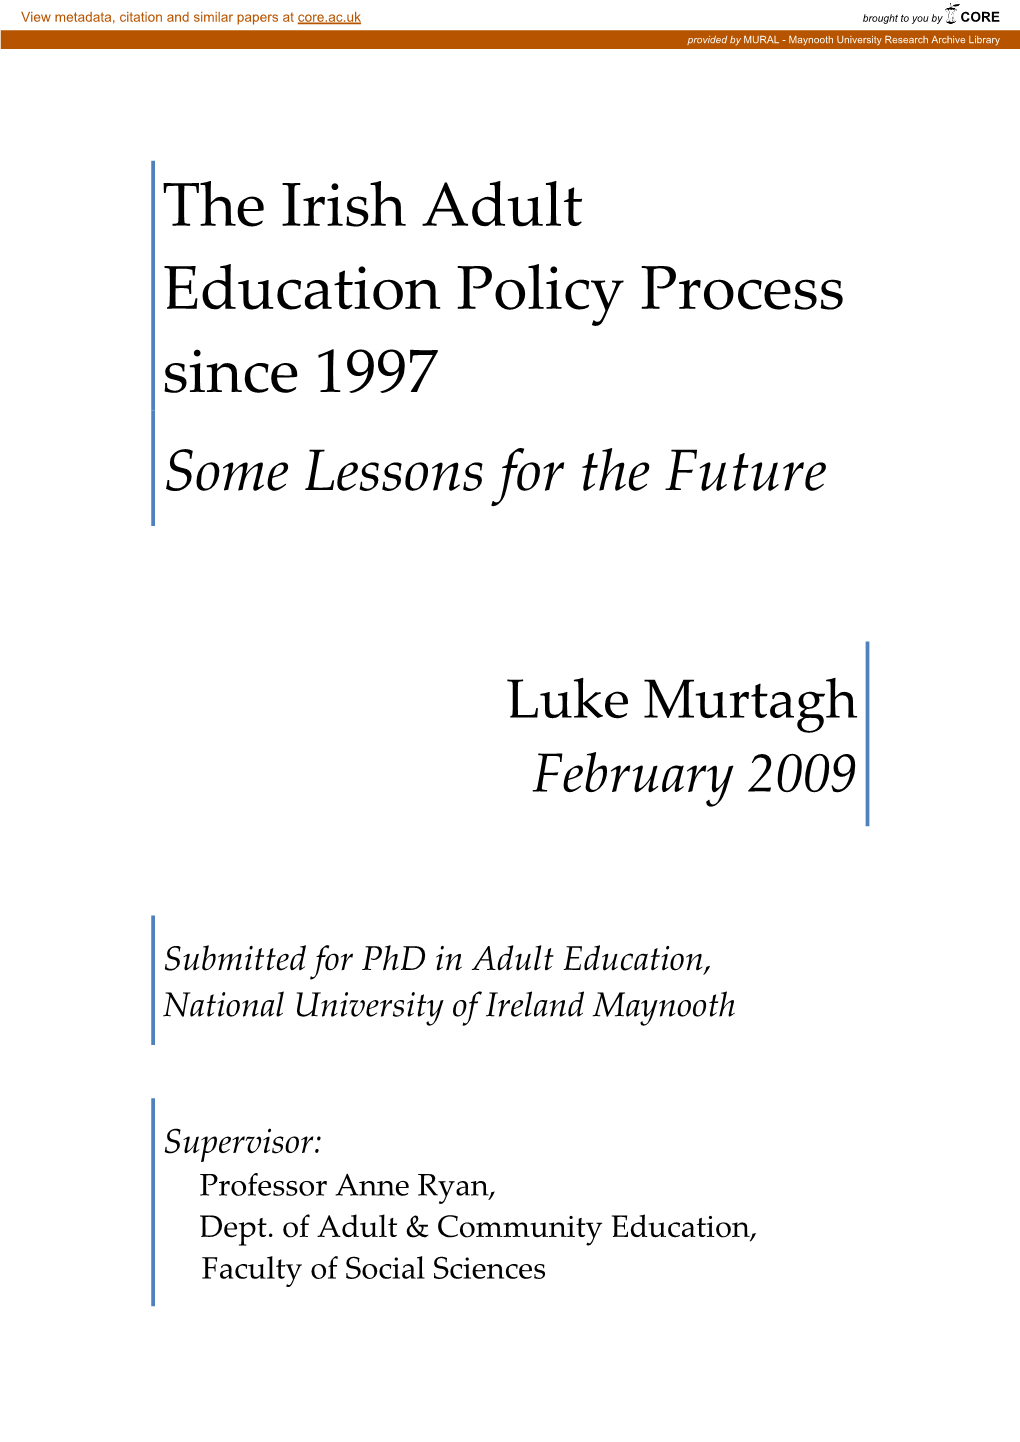 The Irish Adult Education Policy Process Since 1997 Some Lessons for the Future